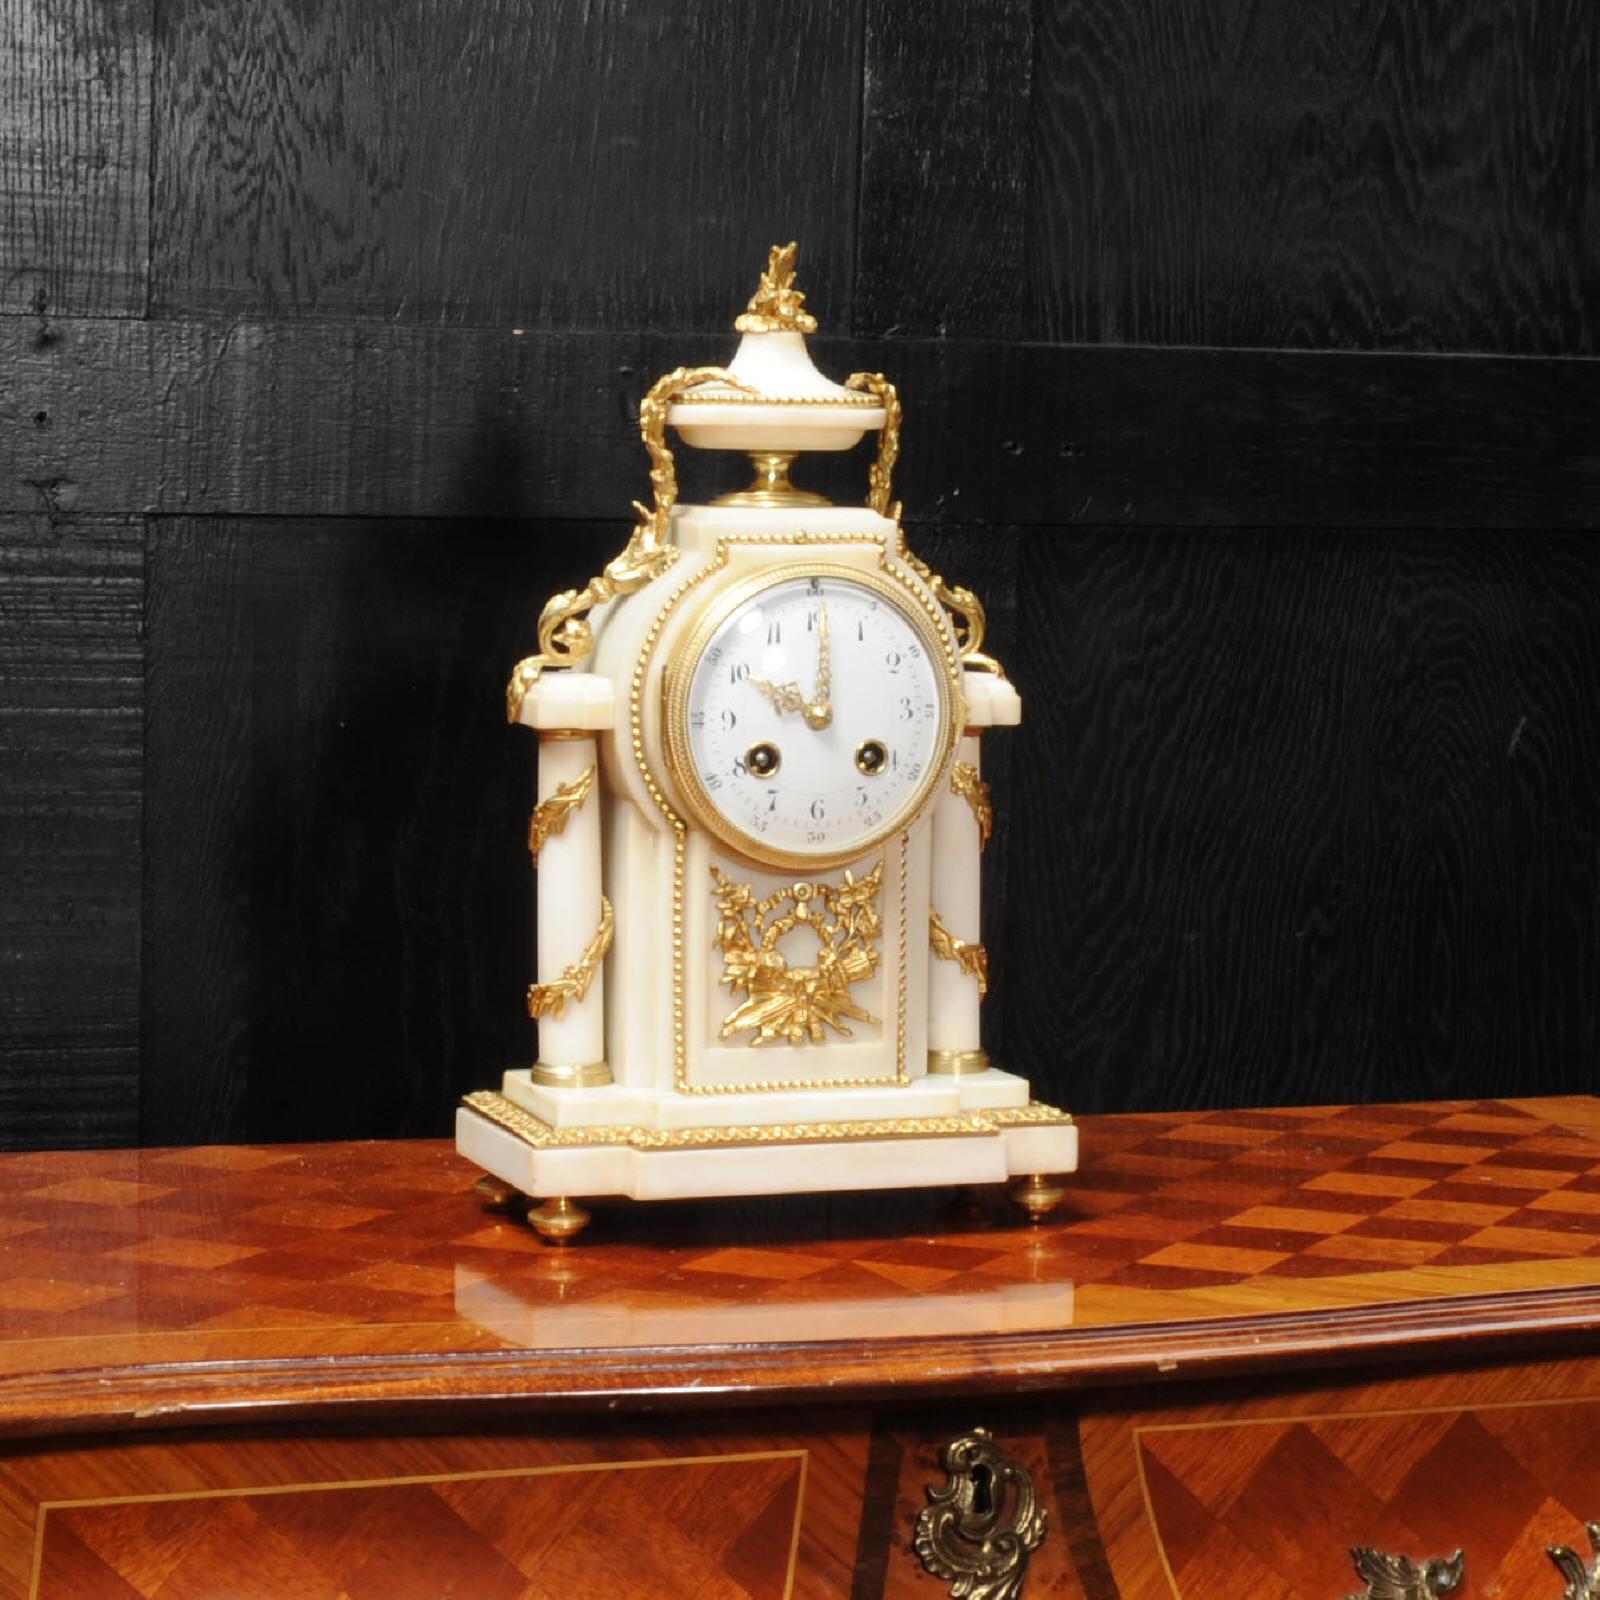 A beautiful antique French ormolu-mounted white marble boudoir clock, circa 1900. It’s of elegant Louis XVI style, classical columns wrapped with foliage and an urn to the top with foliage draped down each side. To the front is a motif of a quiver